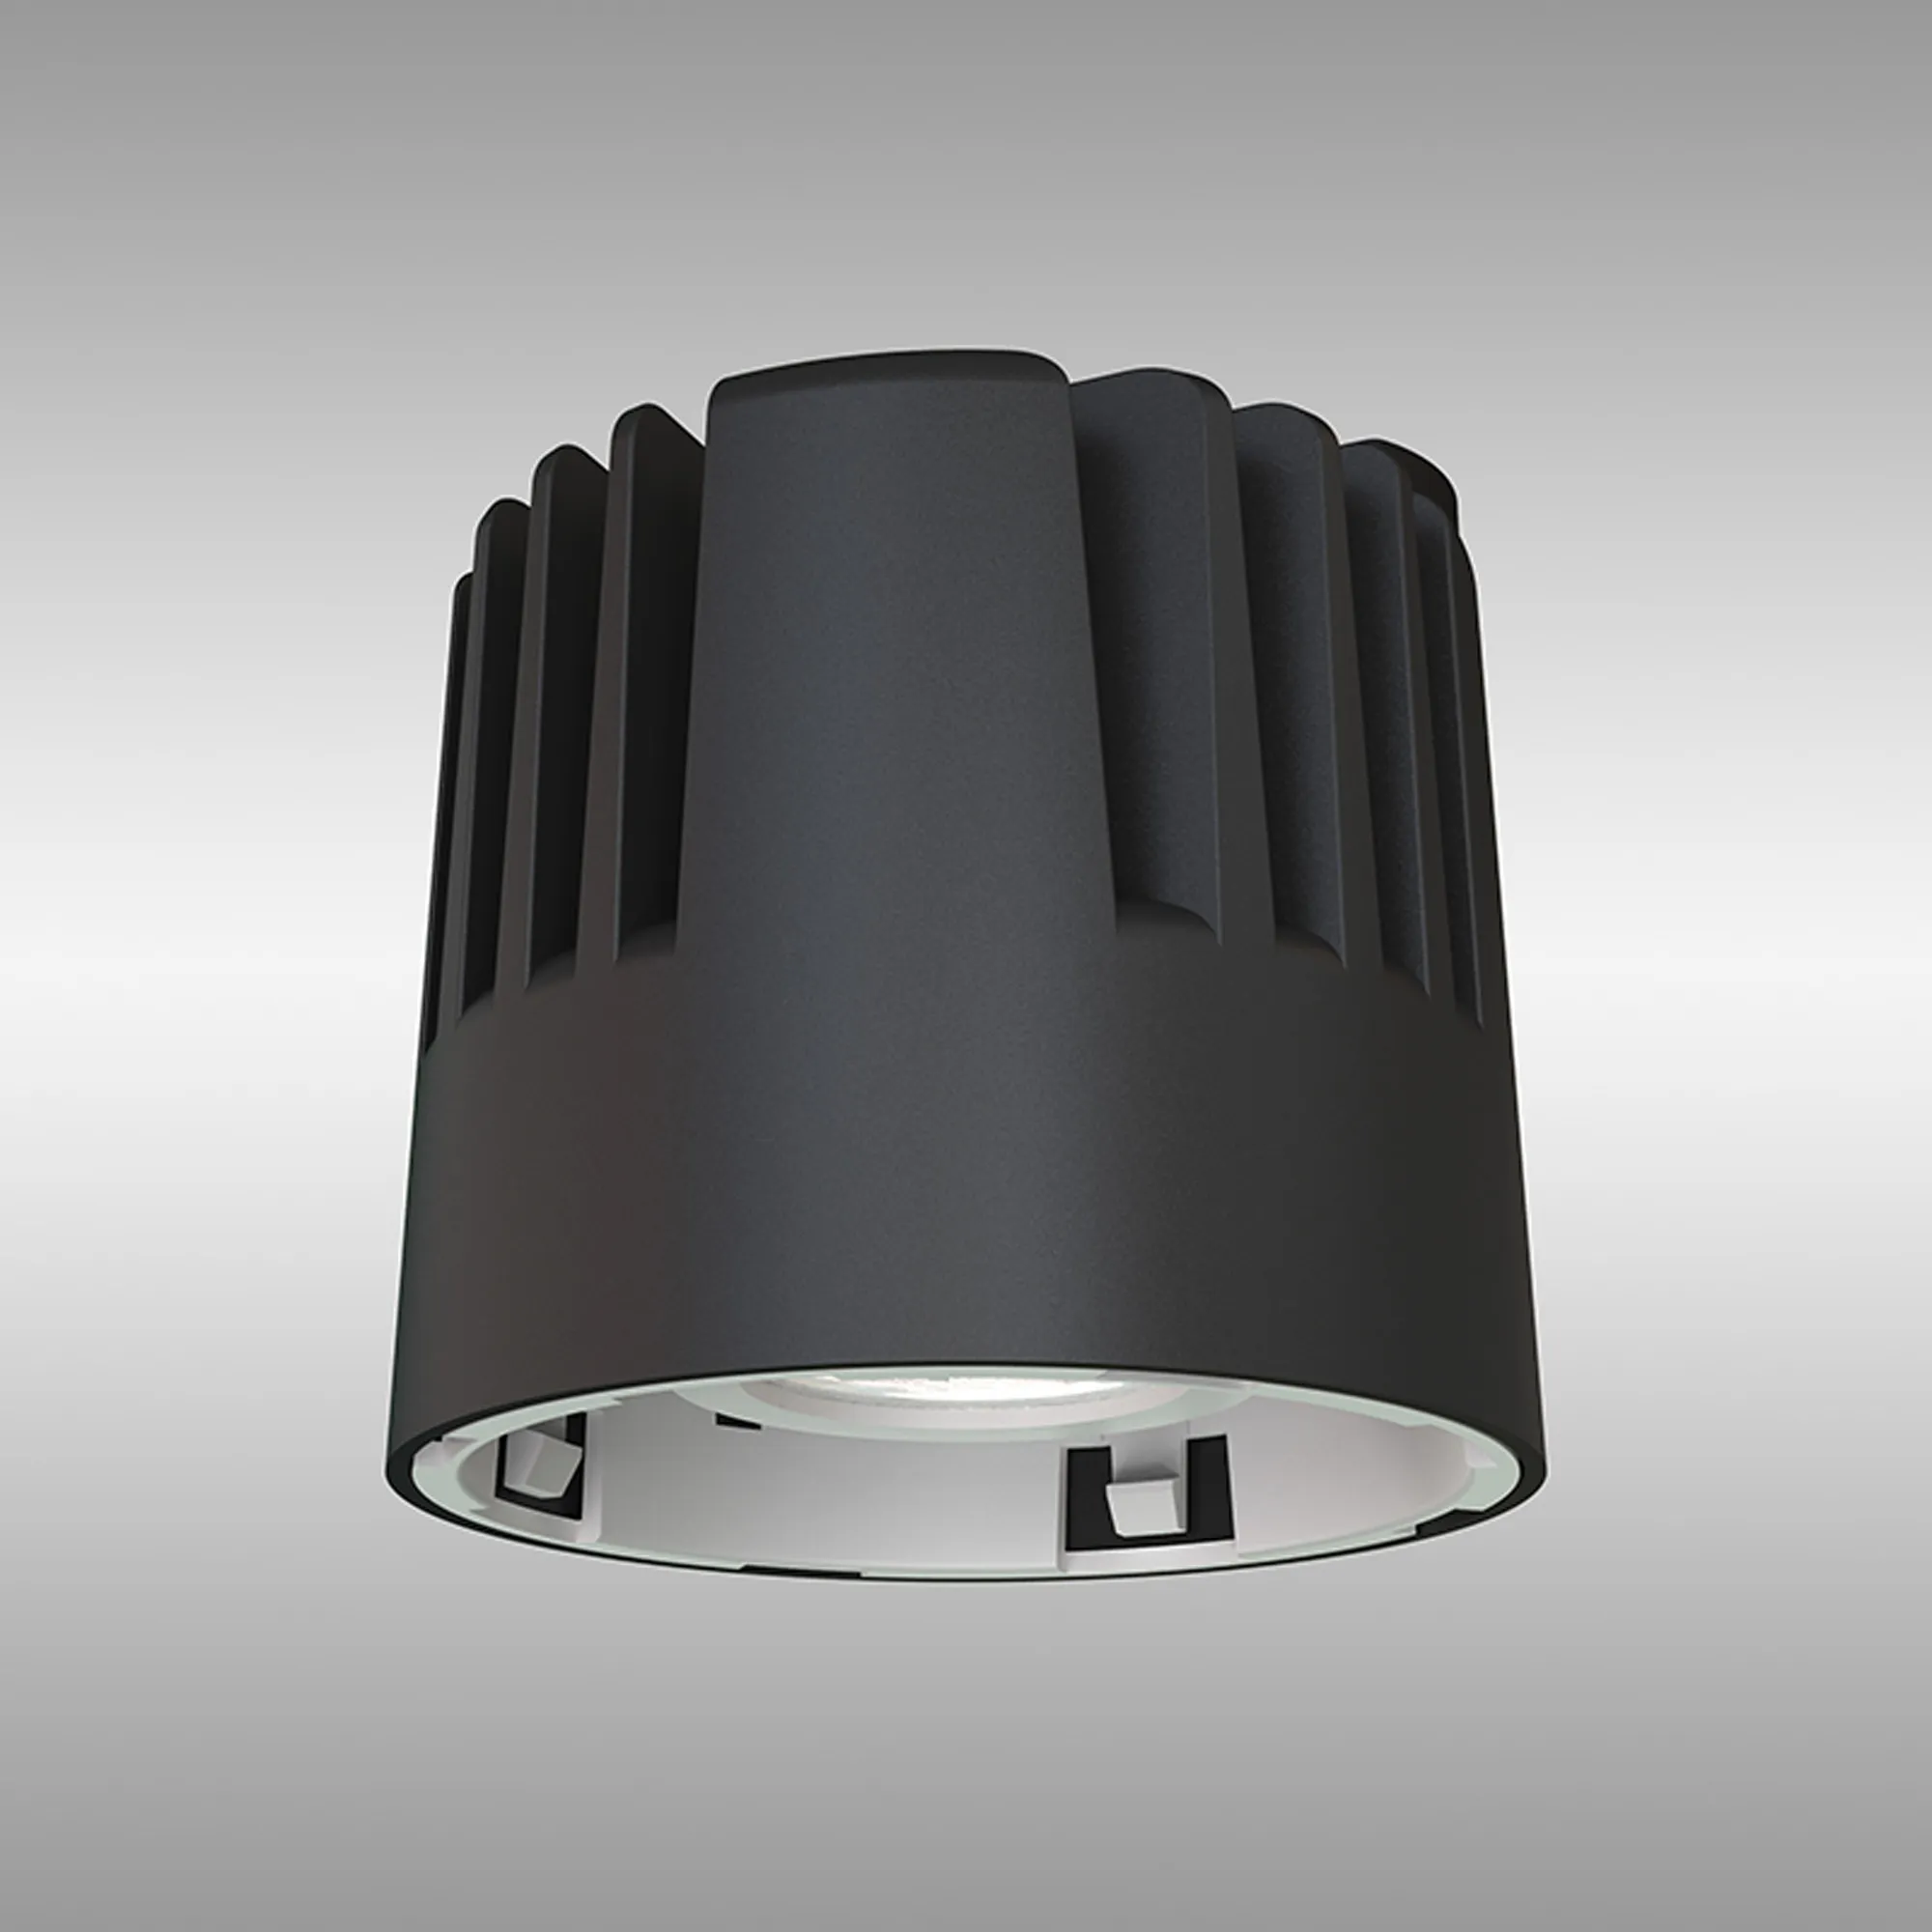 M8780  Sunset; 10W; 250mA; Black LED Engine; 2700K; 765lm; 50° Deg; IP20; DRIVER NOT INC.; Recessed Base Required; 5yrs Warranty